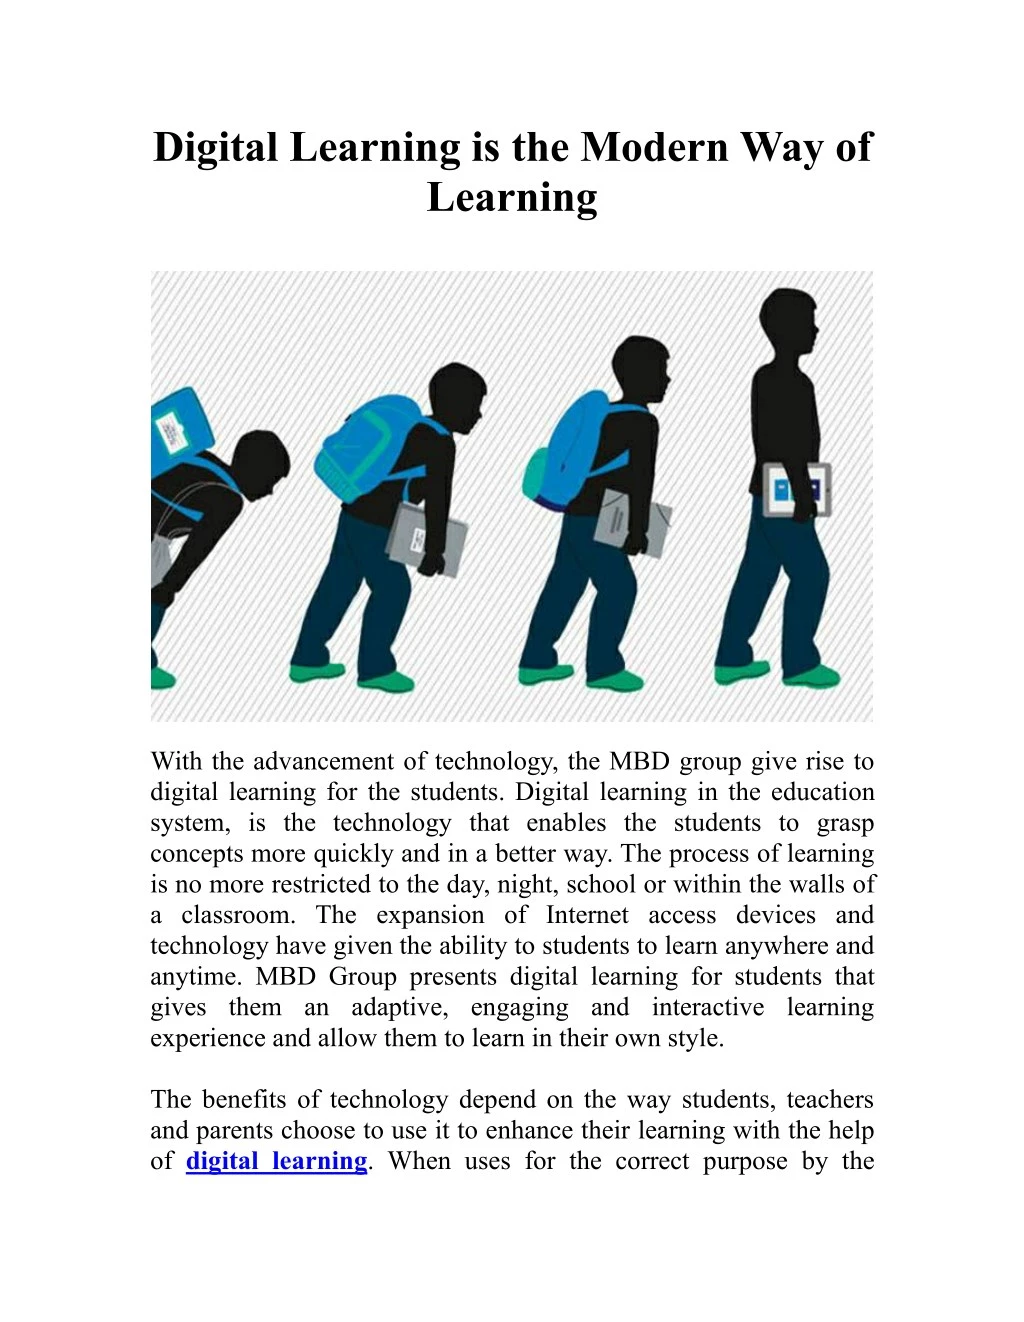 digital learning is the modern way of learning